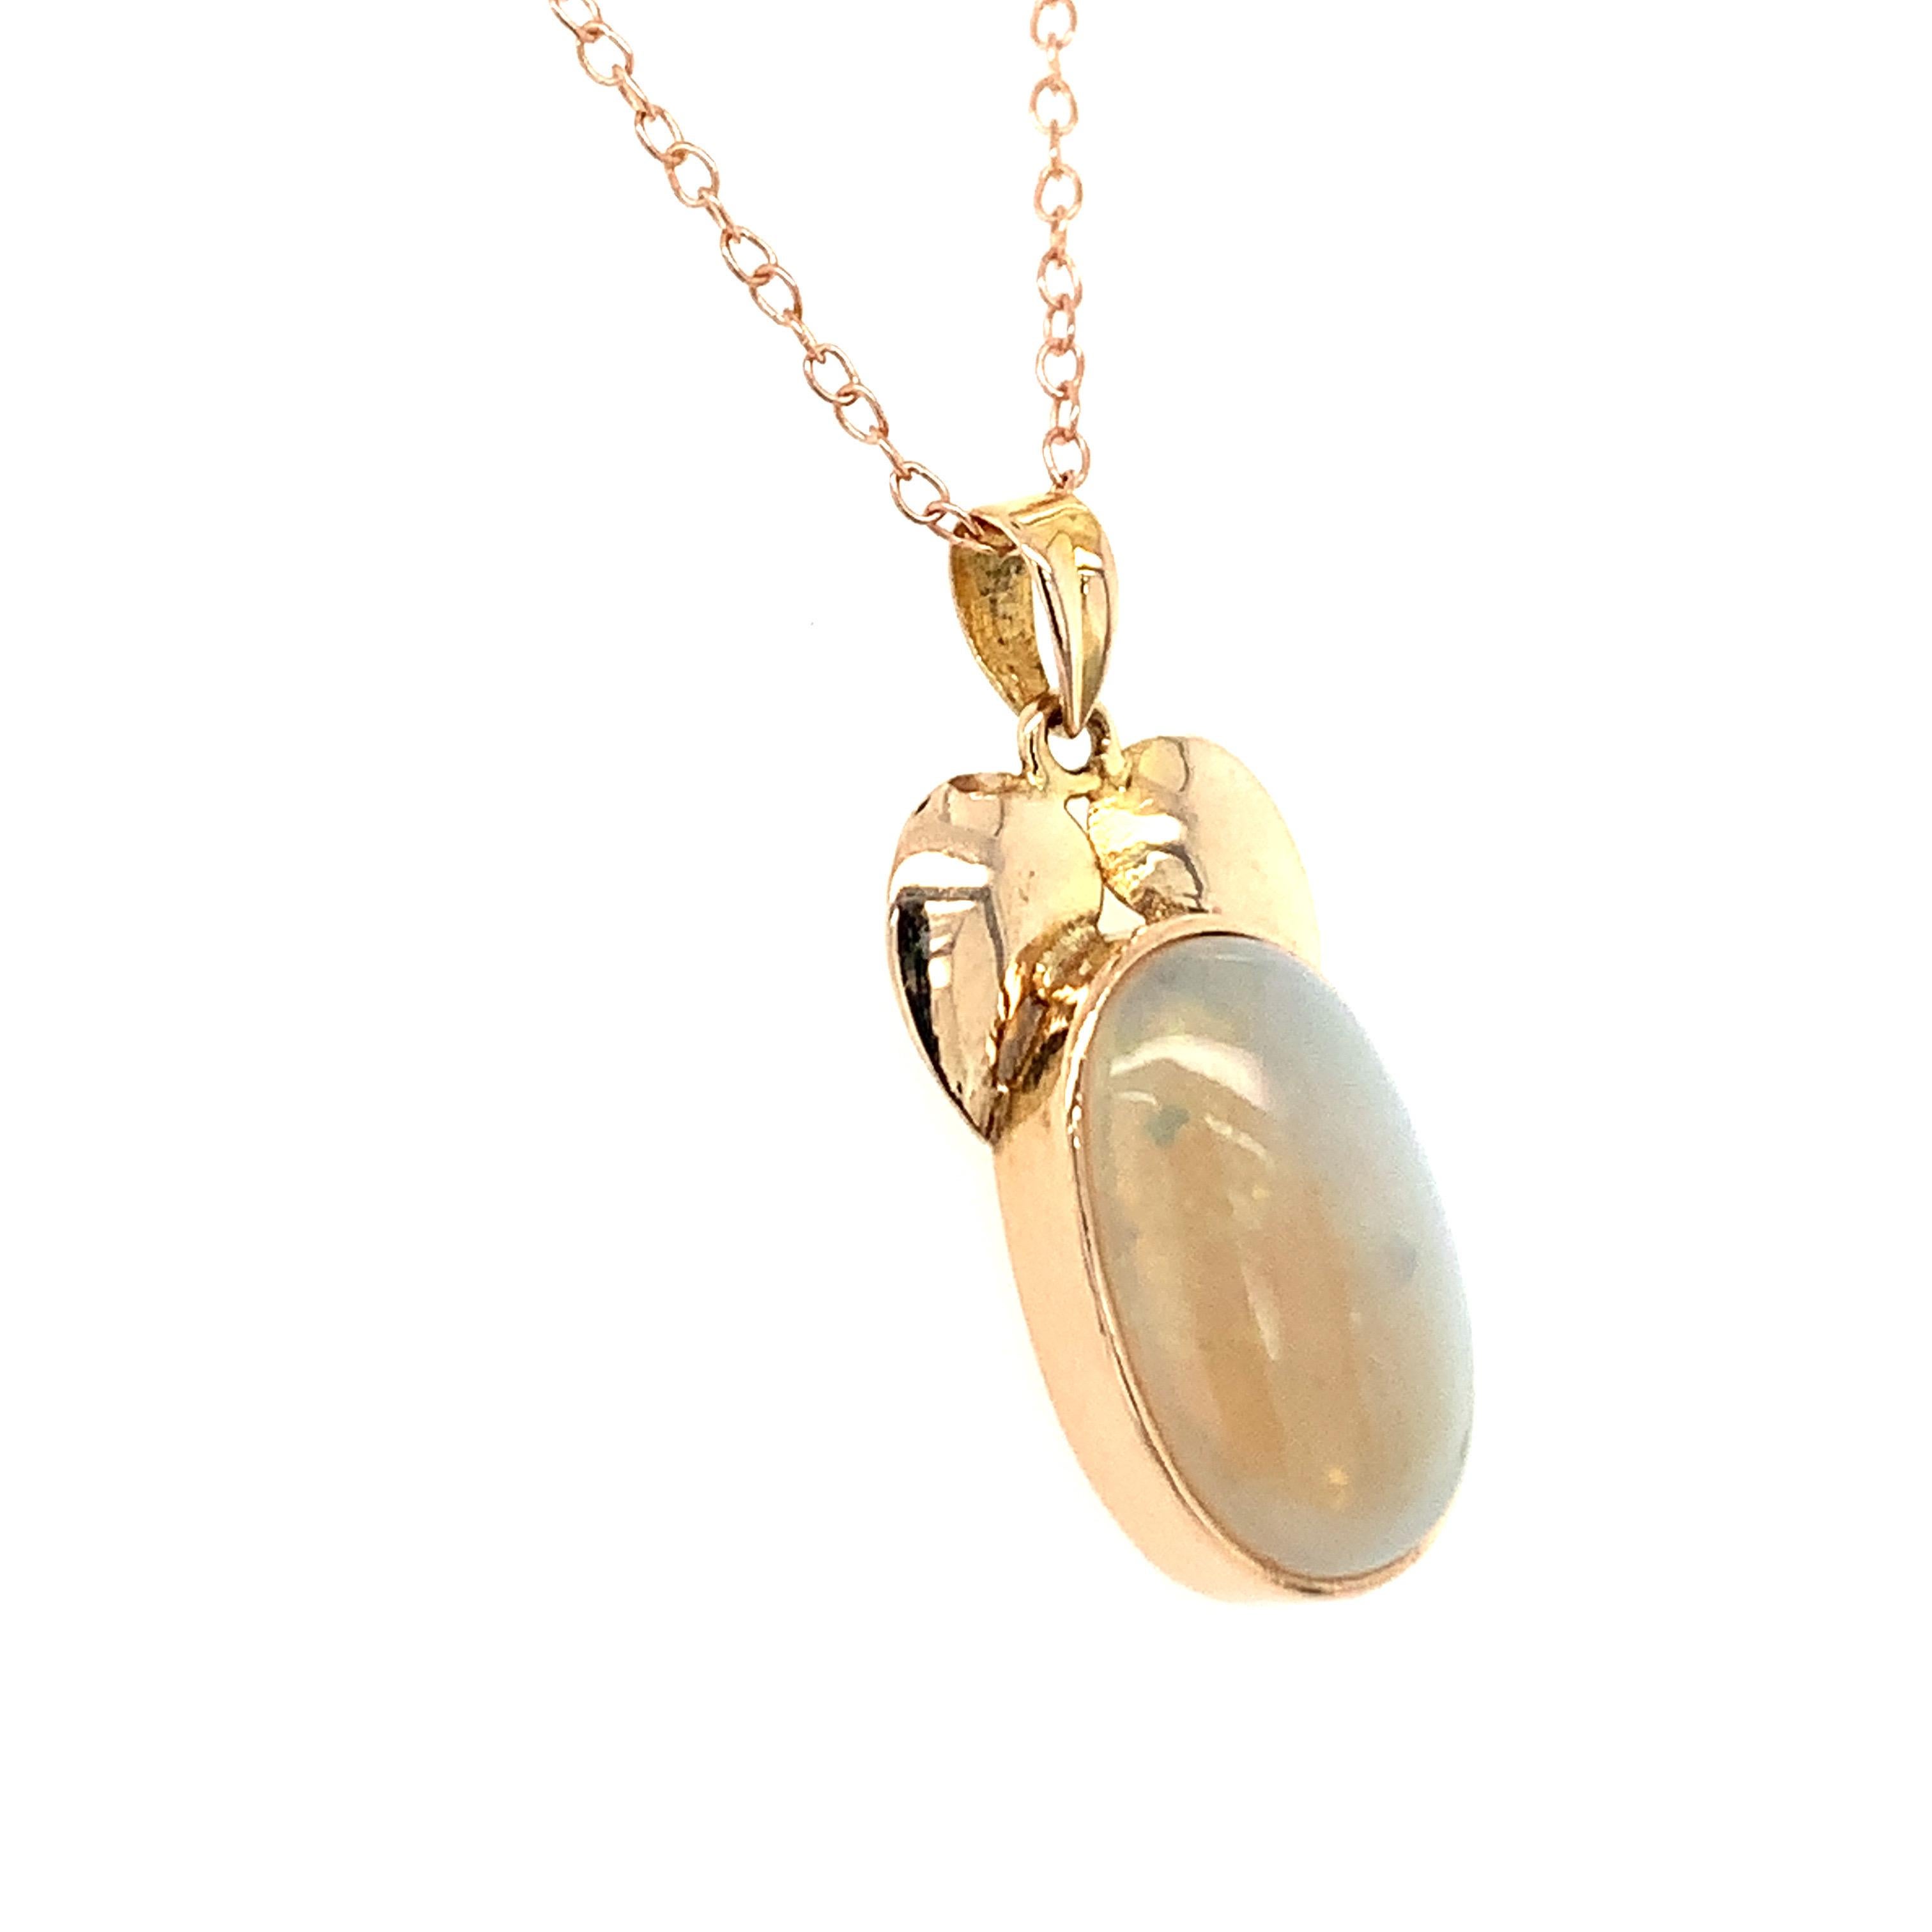 Hand cut and polished natural  Ethiopian Opal is crafted with hand in 14K yellow gold. 
Ideal for daily casual wear.
Chain is not included. 
Image is enlarged for a closer view.
Ethically sourced natural gem stone.